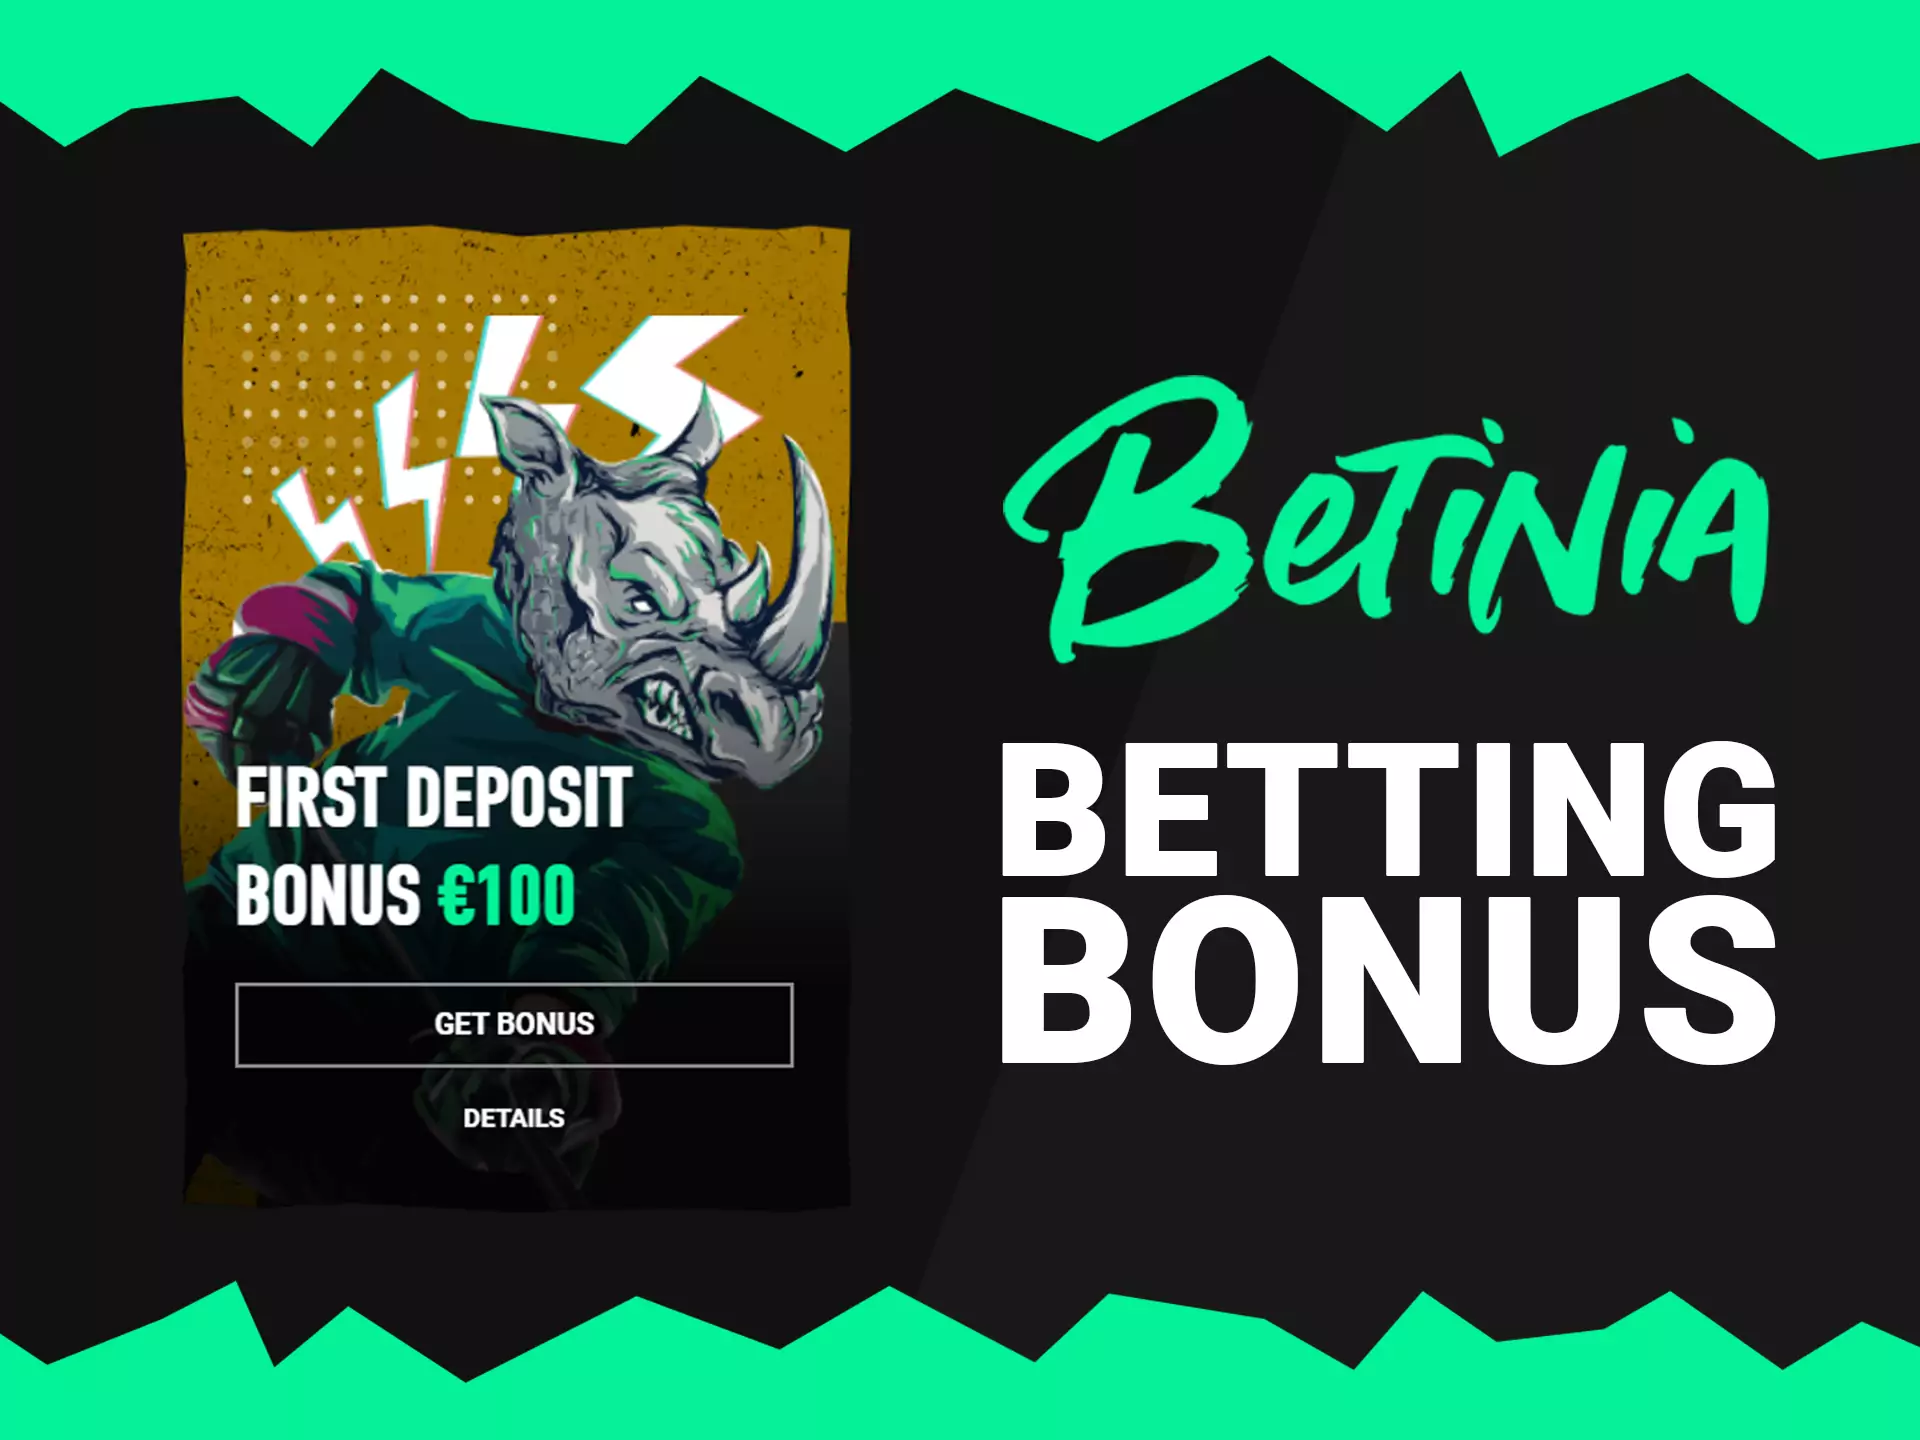 Claim your betting bonus after first deposit.